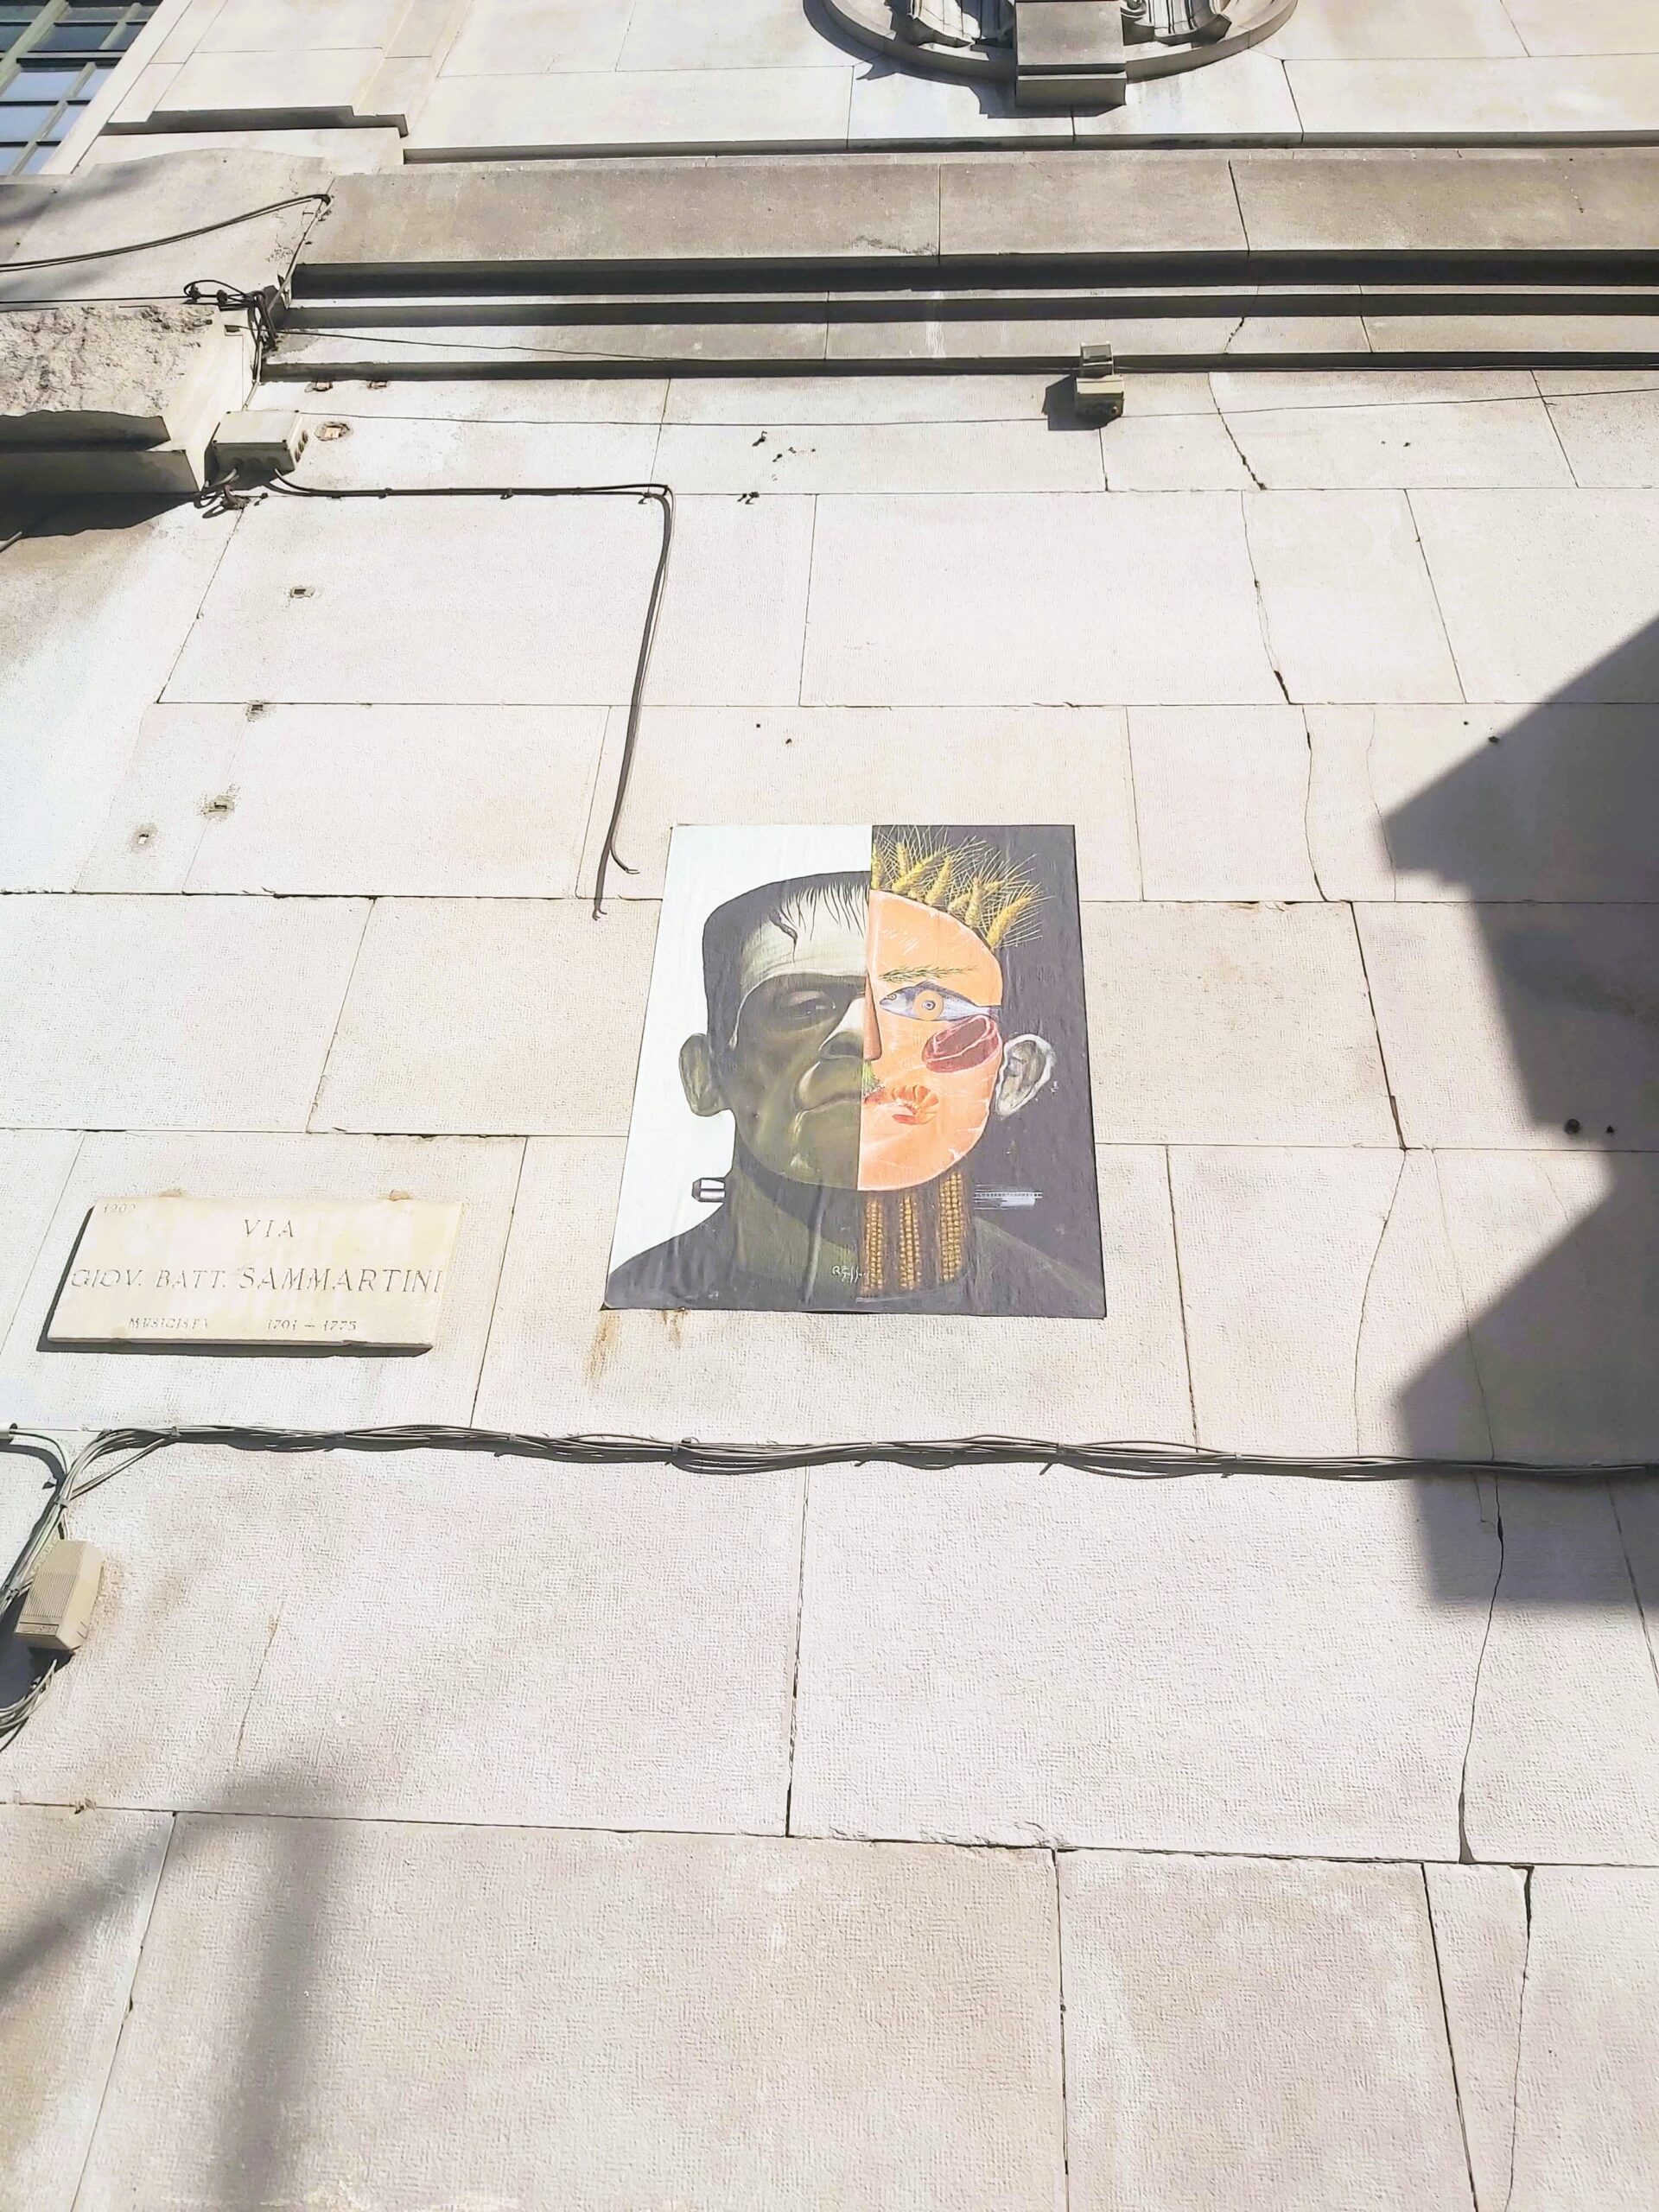 A graffiti image of Frankenstein in Milan, Italy